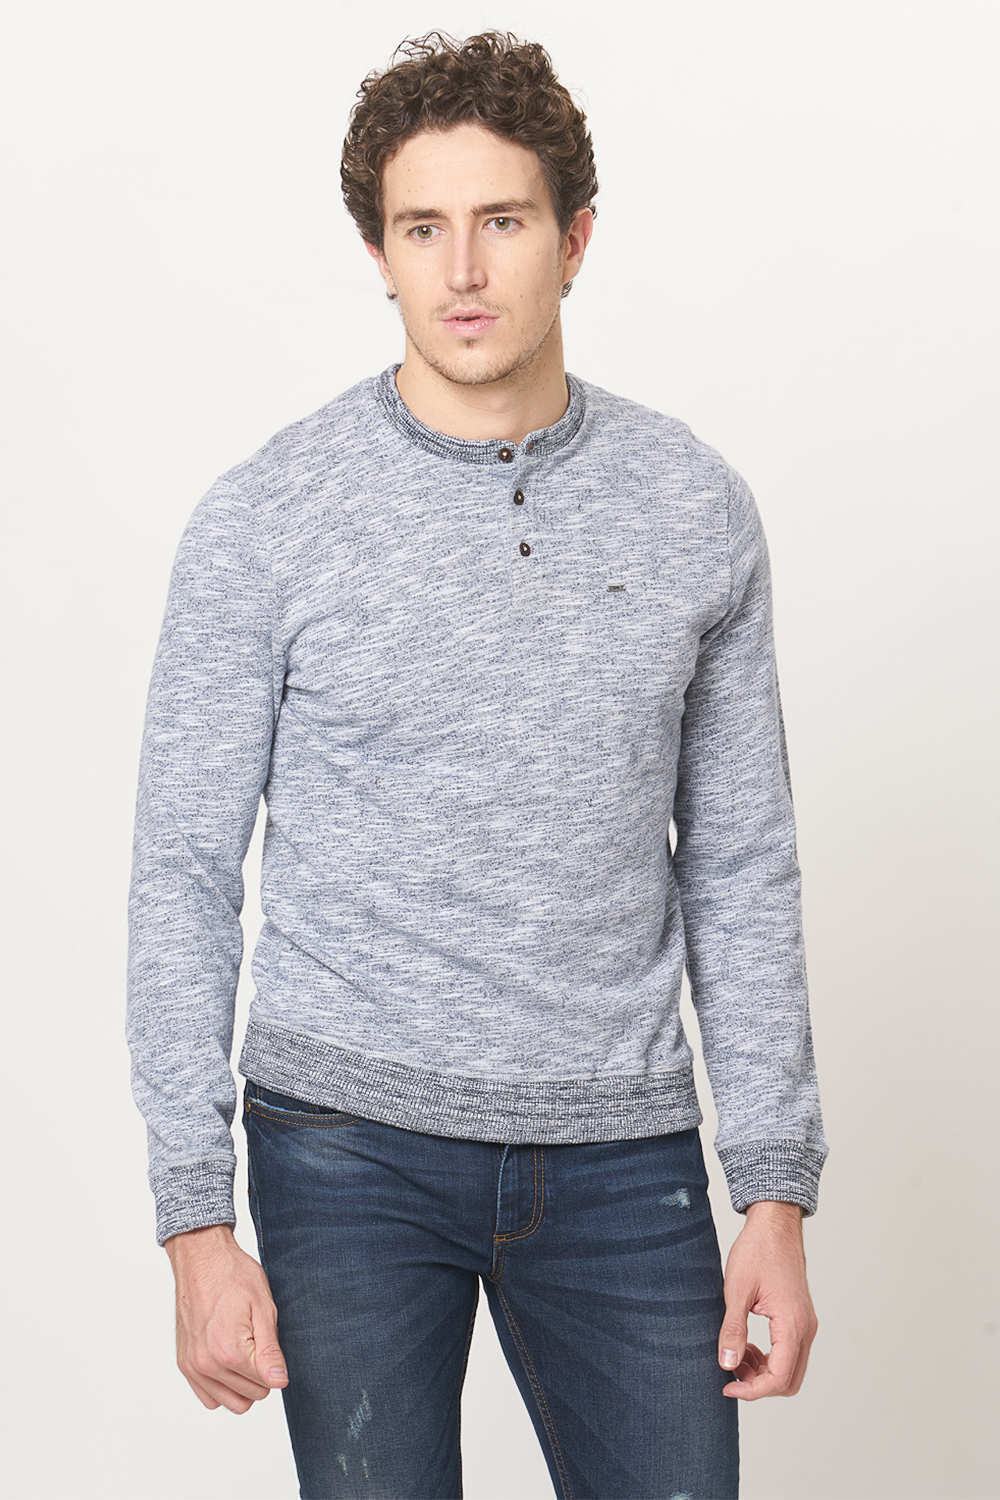 BASICS MUSCLE FIT HENLEY PULLOVER